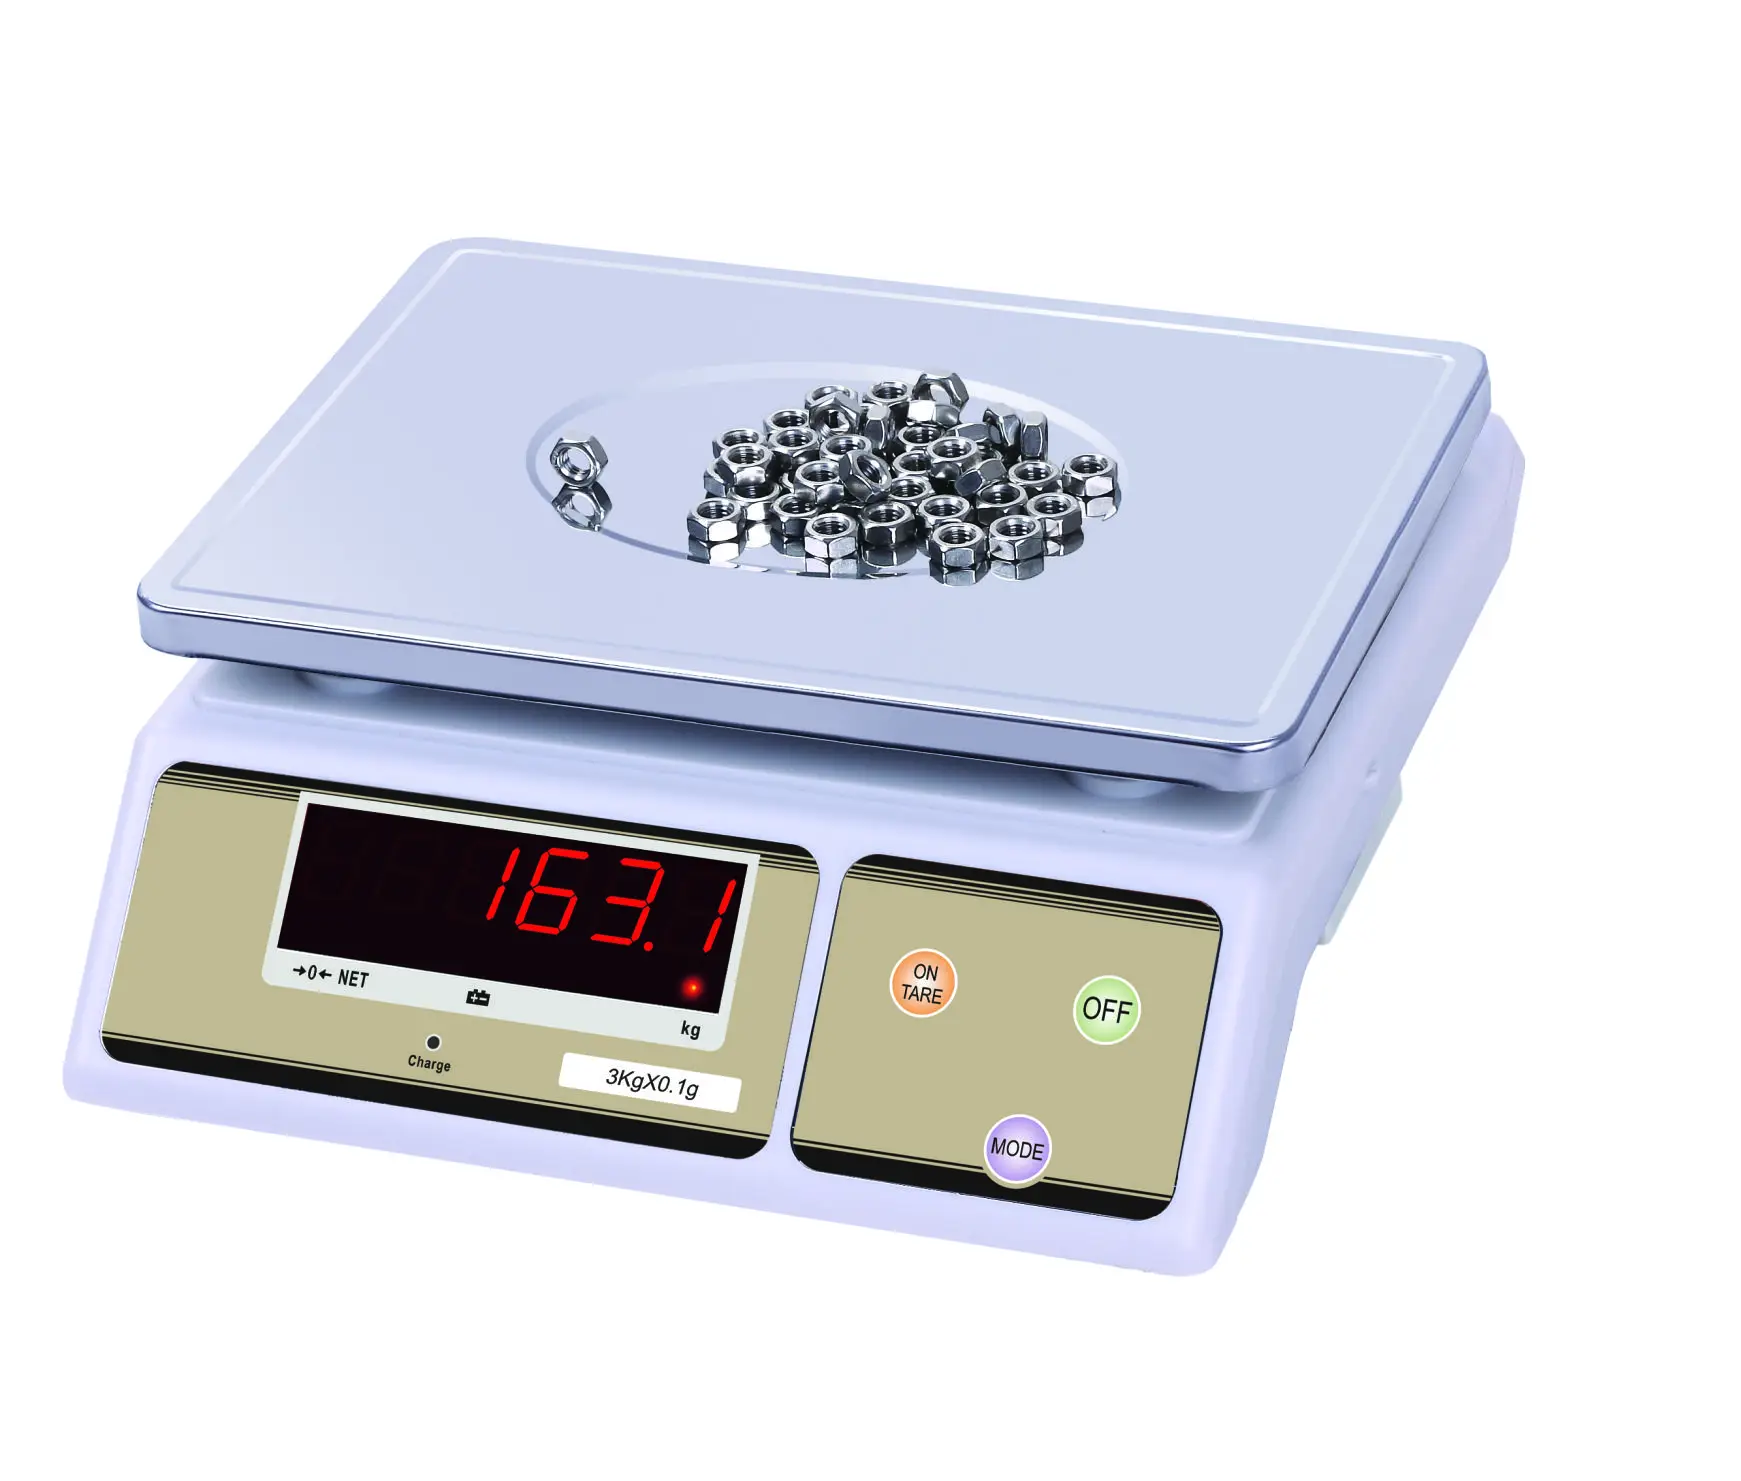 Digital Weighing  Scale kitchen scale3Kg 0.1g 6Kg0.2g 15Kg0.5g 30kg1gFood Scales Digital Weight Gram and Oz Scale with LCD/ Tare 500g x 0 01g high accuracy portable weight scale mini electronic balance digital pocket kitchen jewelry scales weighing machine